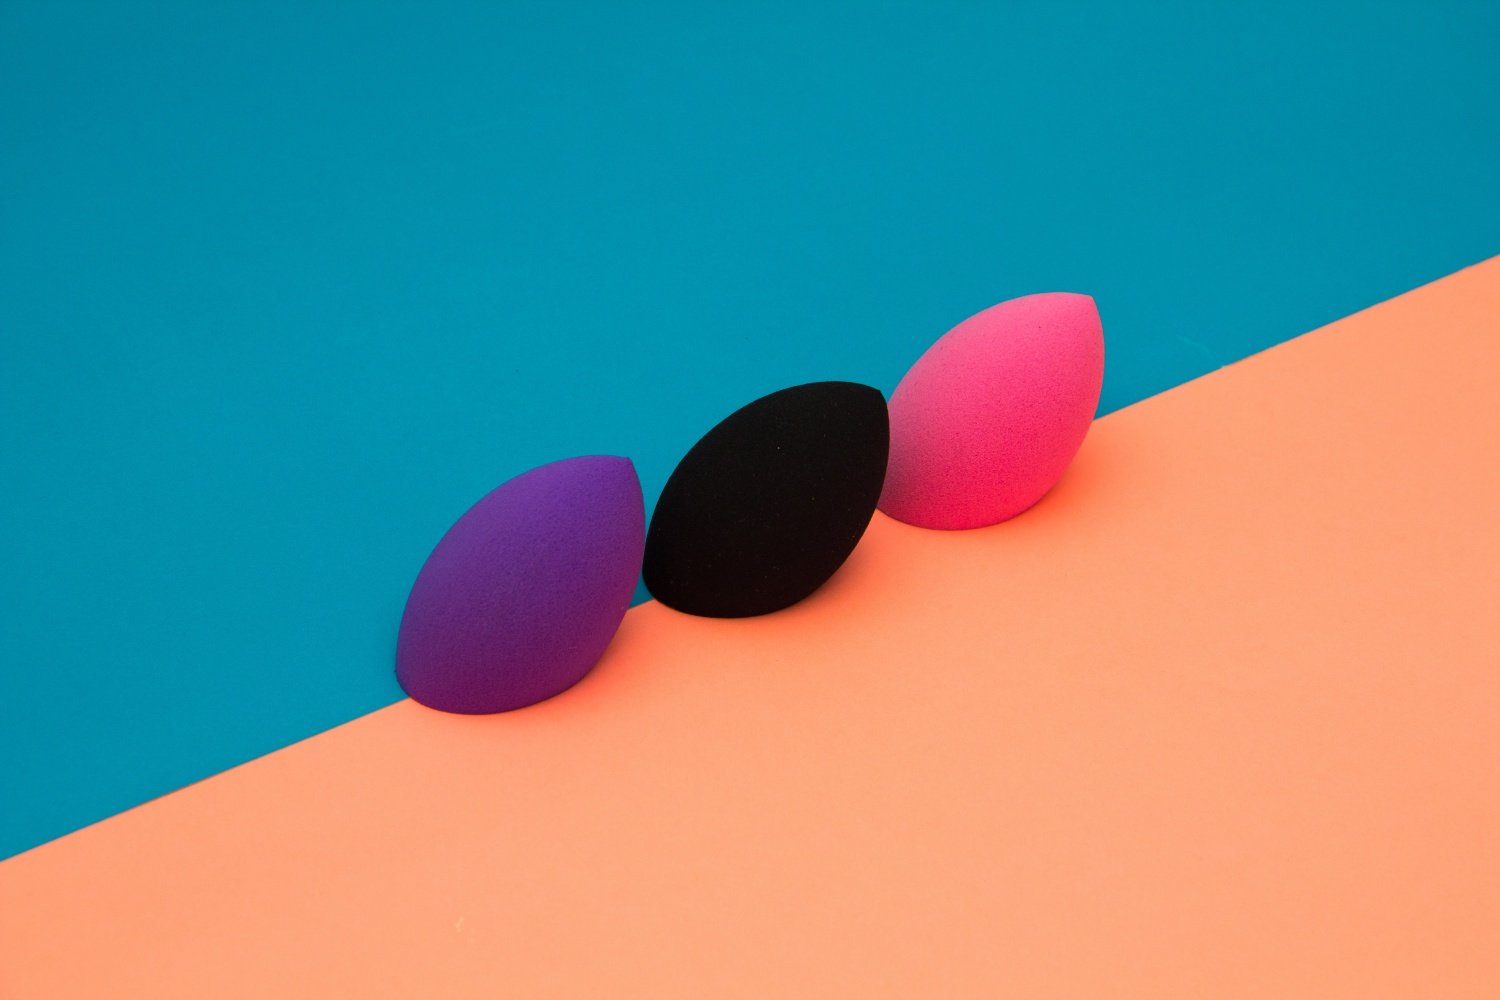 How To Clean A Beauty Blender